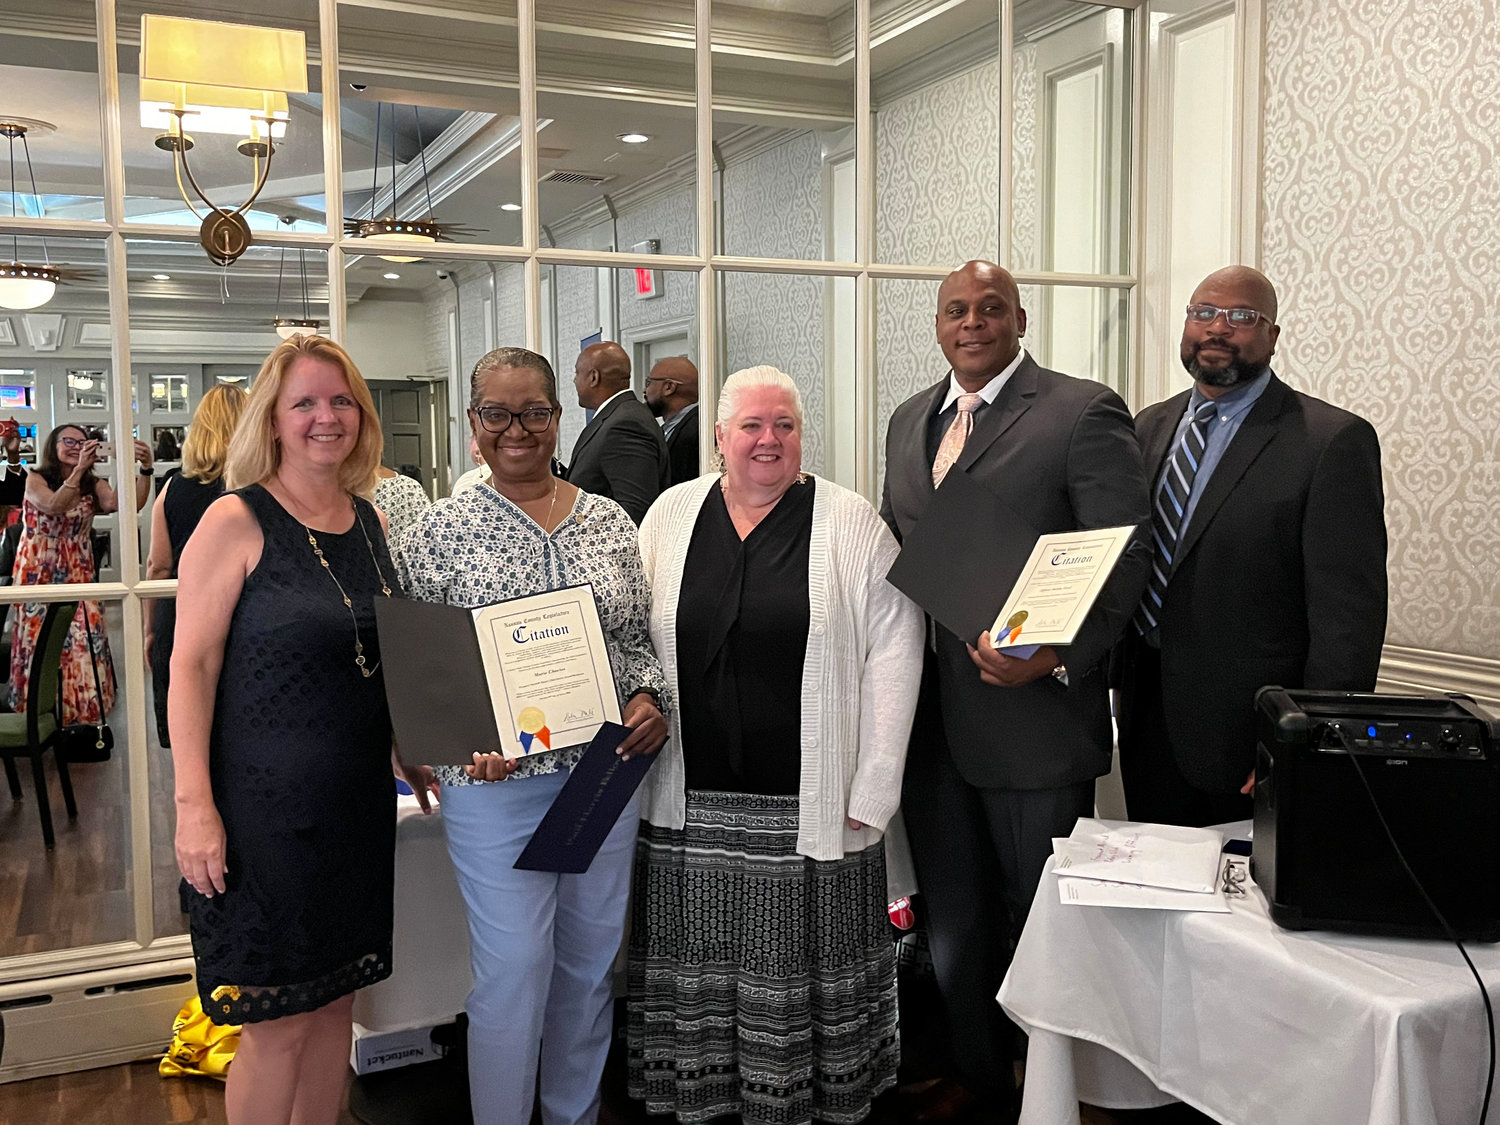 Legislature Debra Mulé, Past District Governor Mary Ellen Ellwood, and past president Marc Rigueur congratulated newly elected Rotary treasurer Marie Charles and Freeport Police Officer Bobby Ford for receiving the club’s prestigious Paul Harris Award.